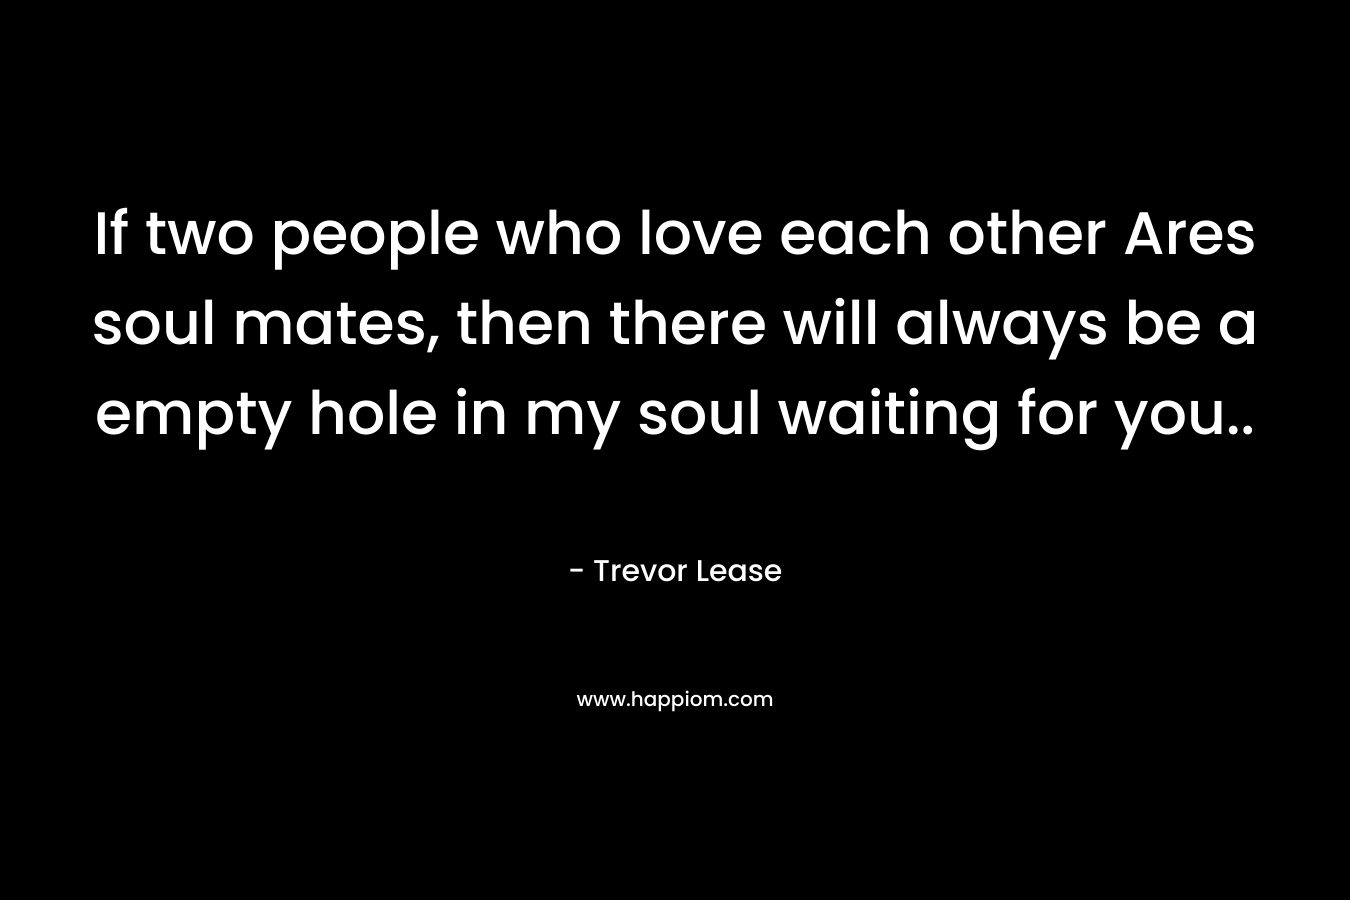 If two people who love each other Ares soul mates, then there will always be a empty hole in my soul waiting for you.. – Trevor Lease